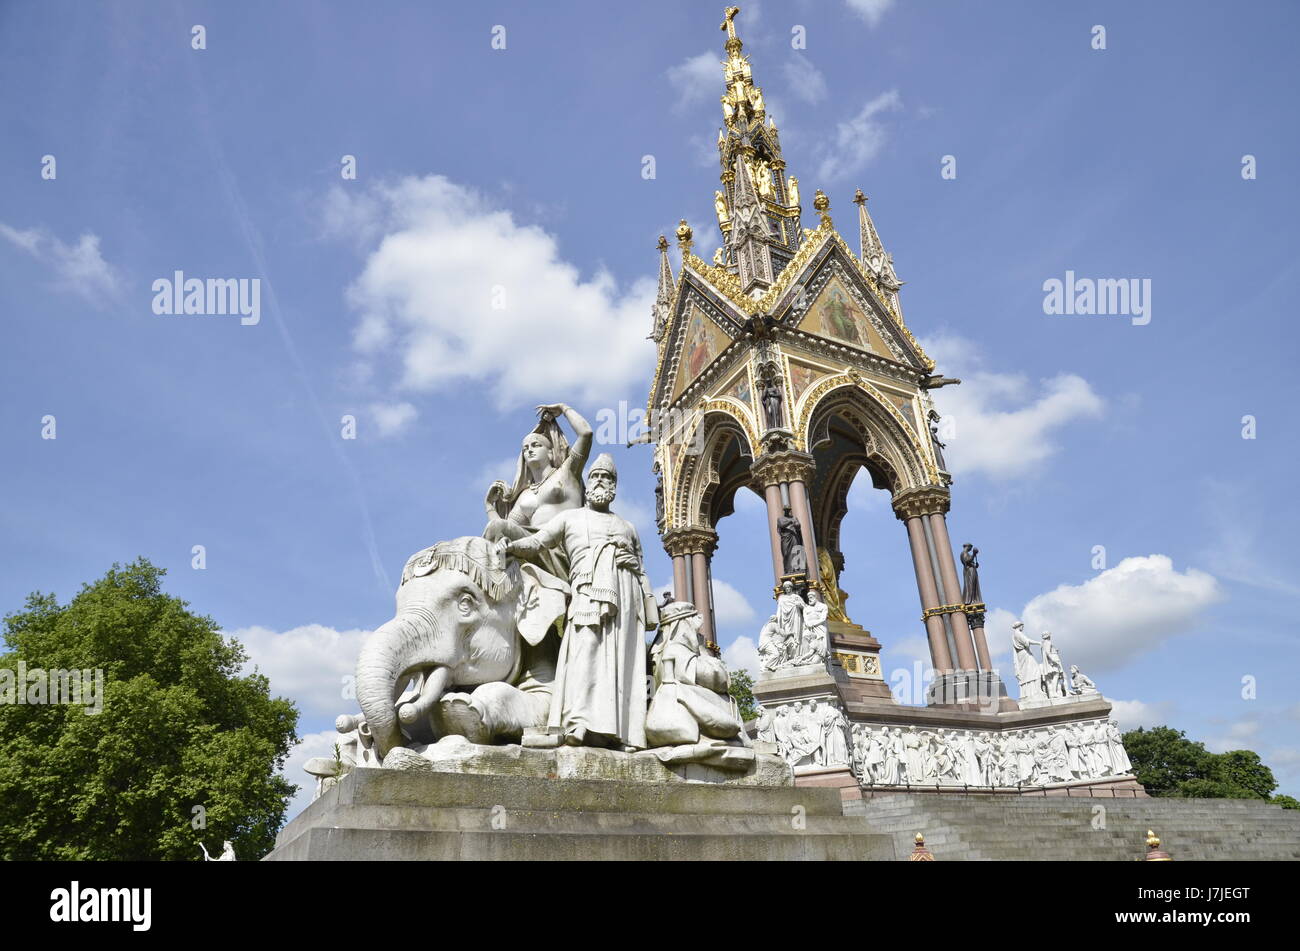 The 'Africa Group' allegorical sculptures on Albert Memorial in Kensington Gardens, London designed by William Theed Stock Photo